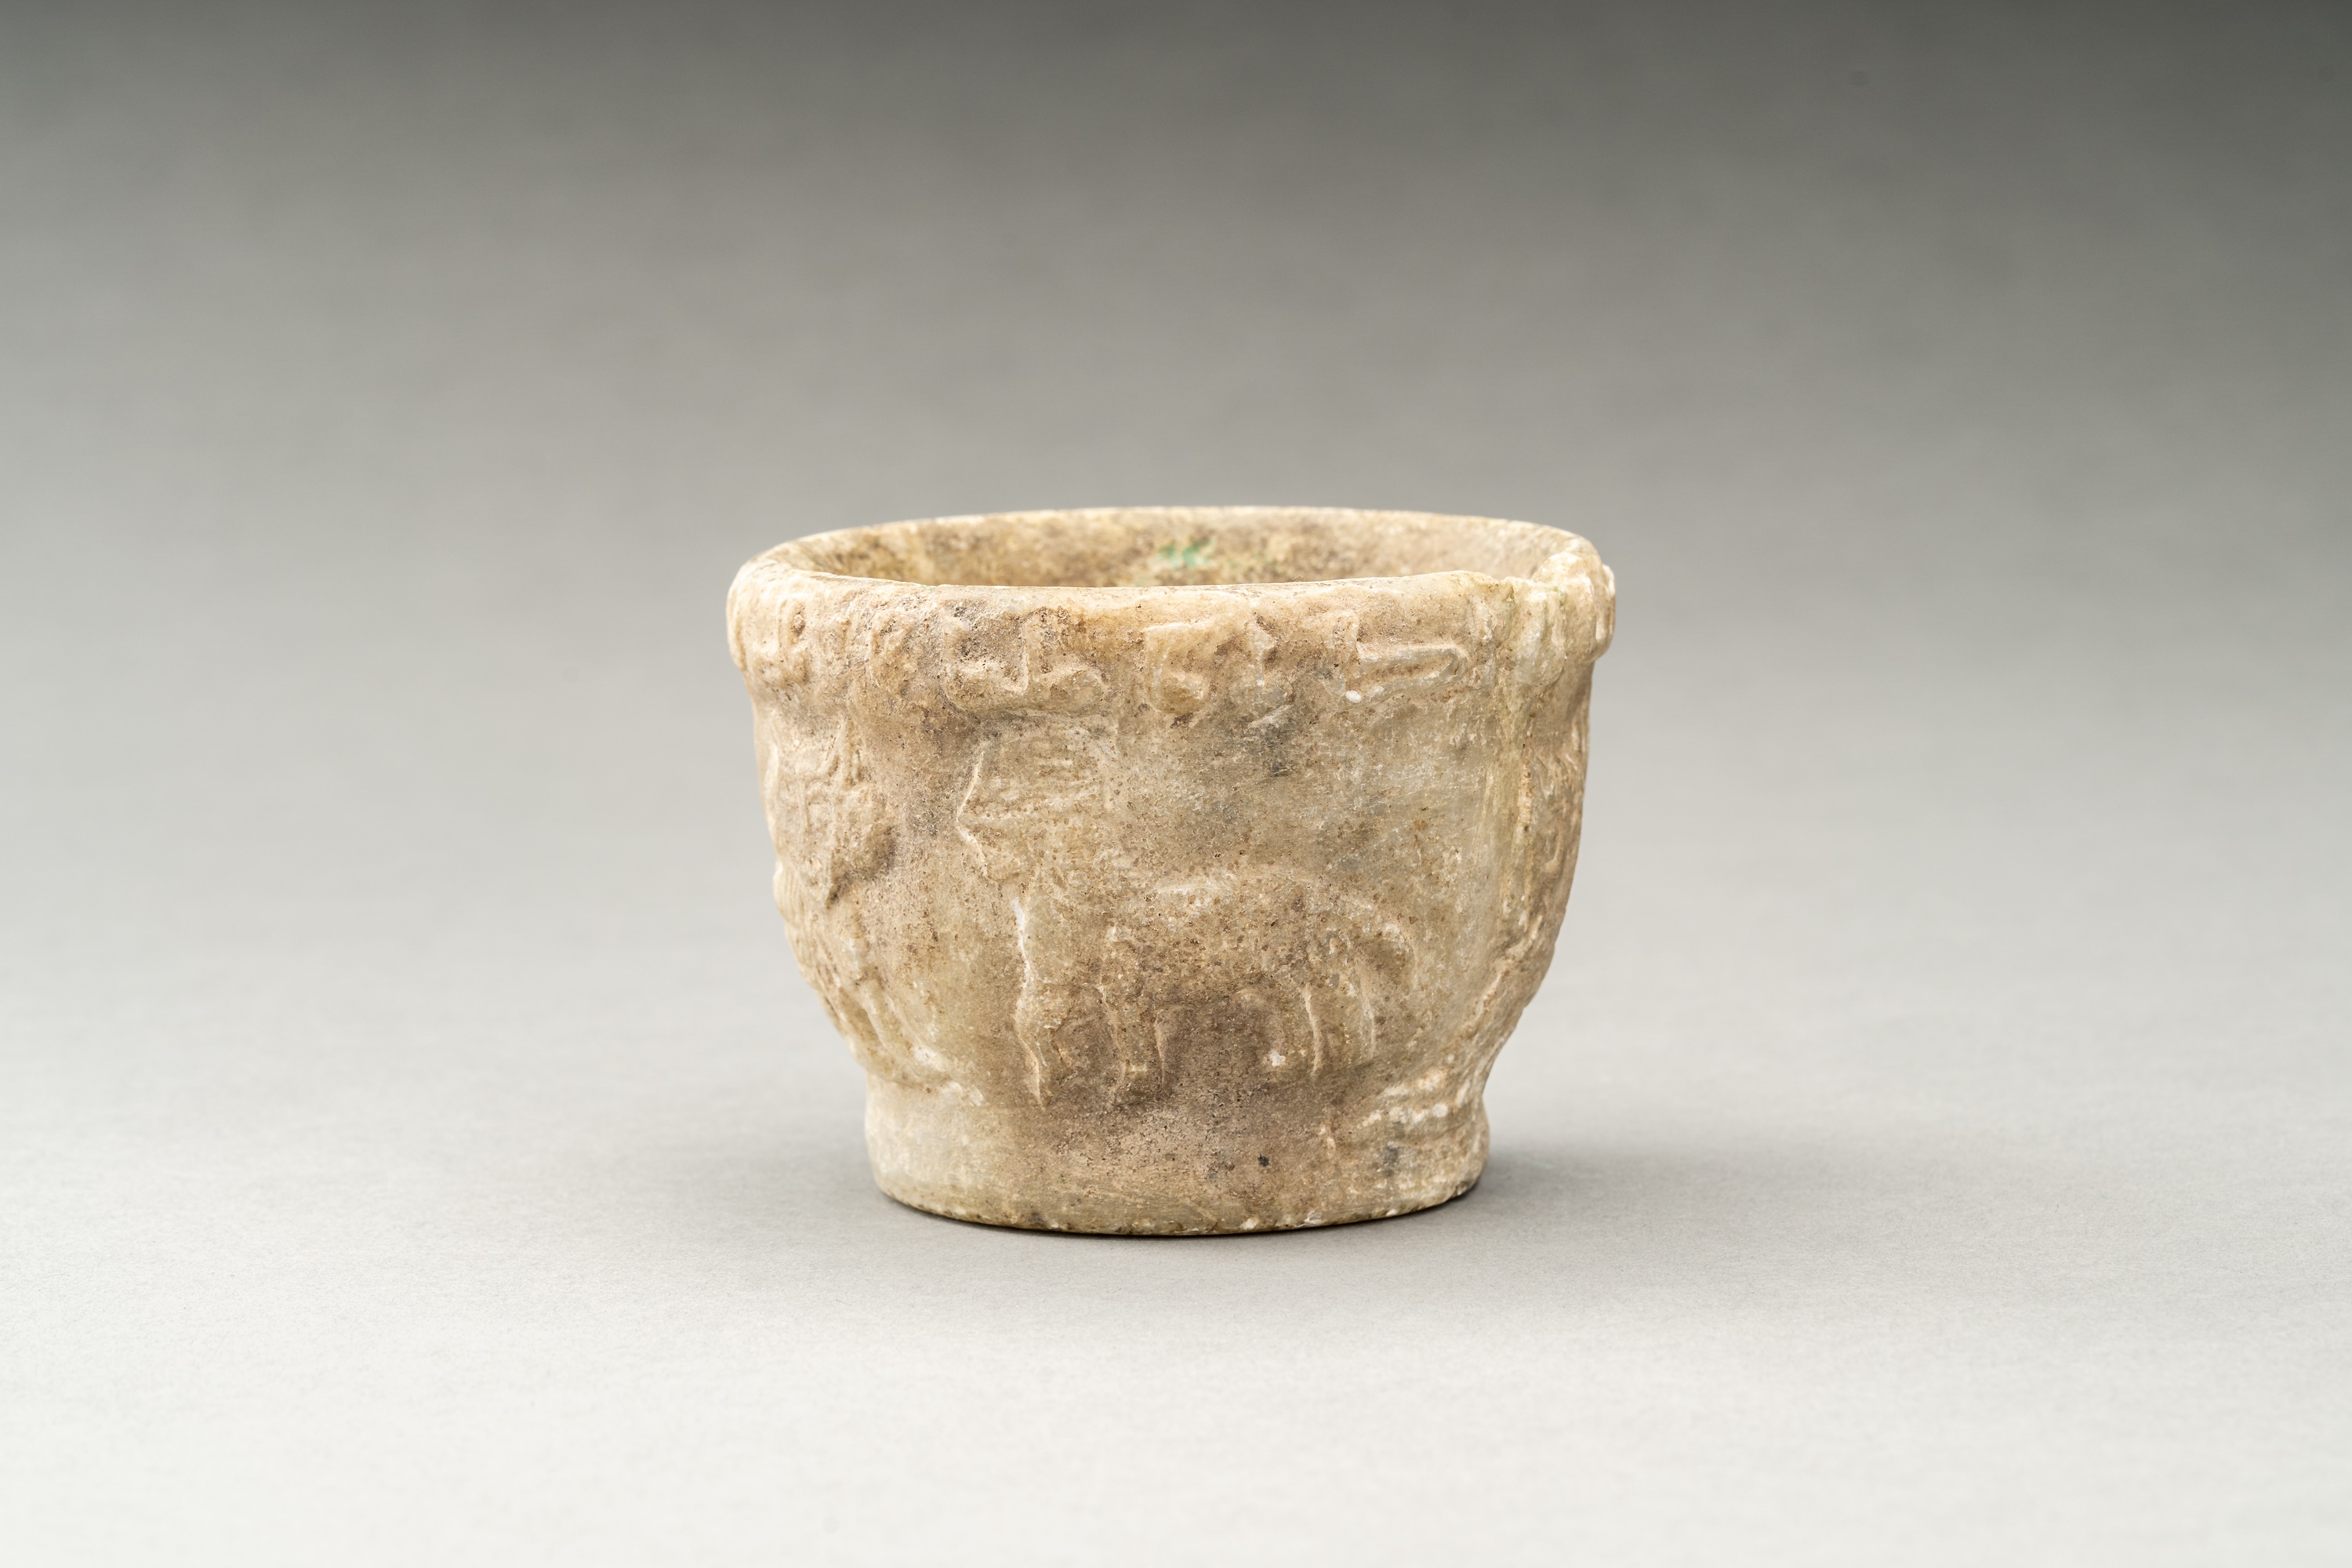 A WESTERN ASIATIC MARBLE BOWL, 3RD MILLENNIUM BC - Image 6 of 8